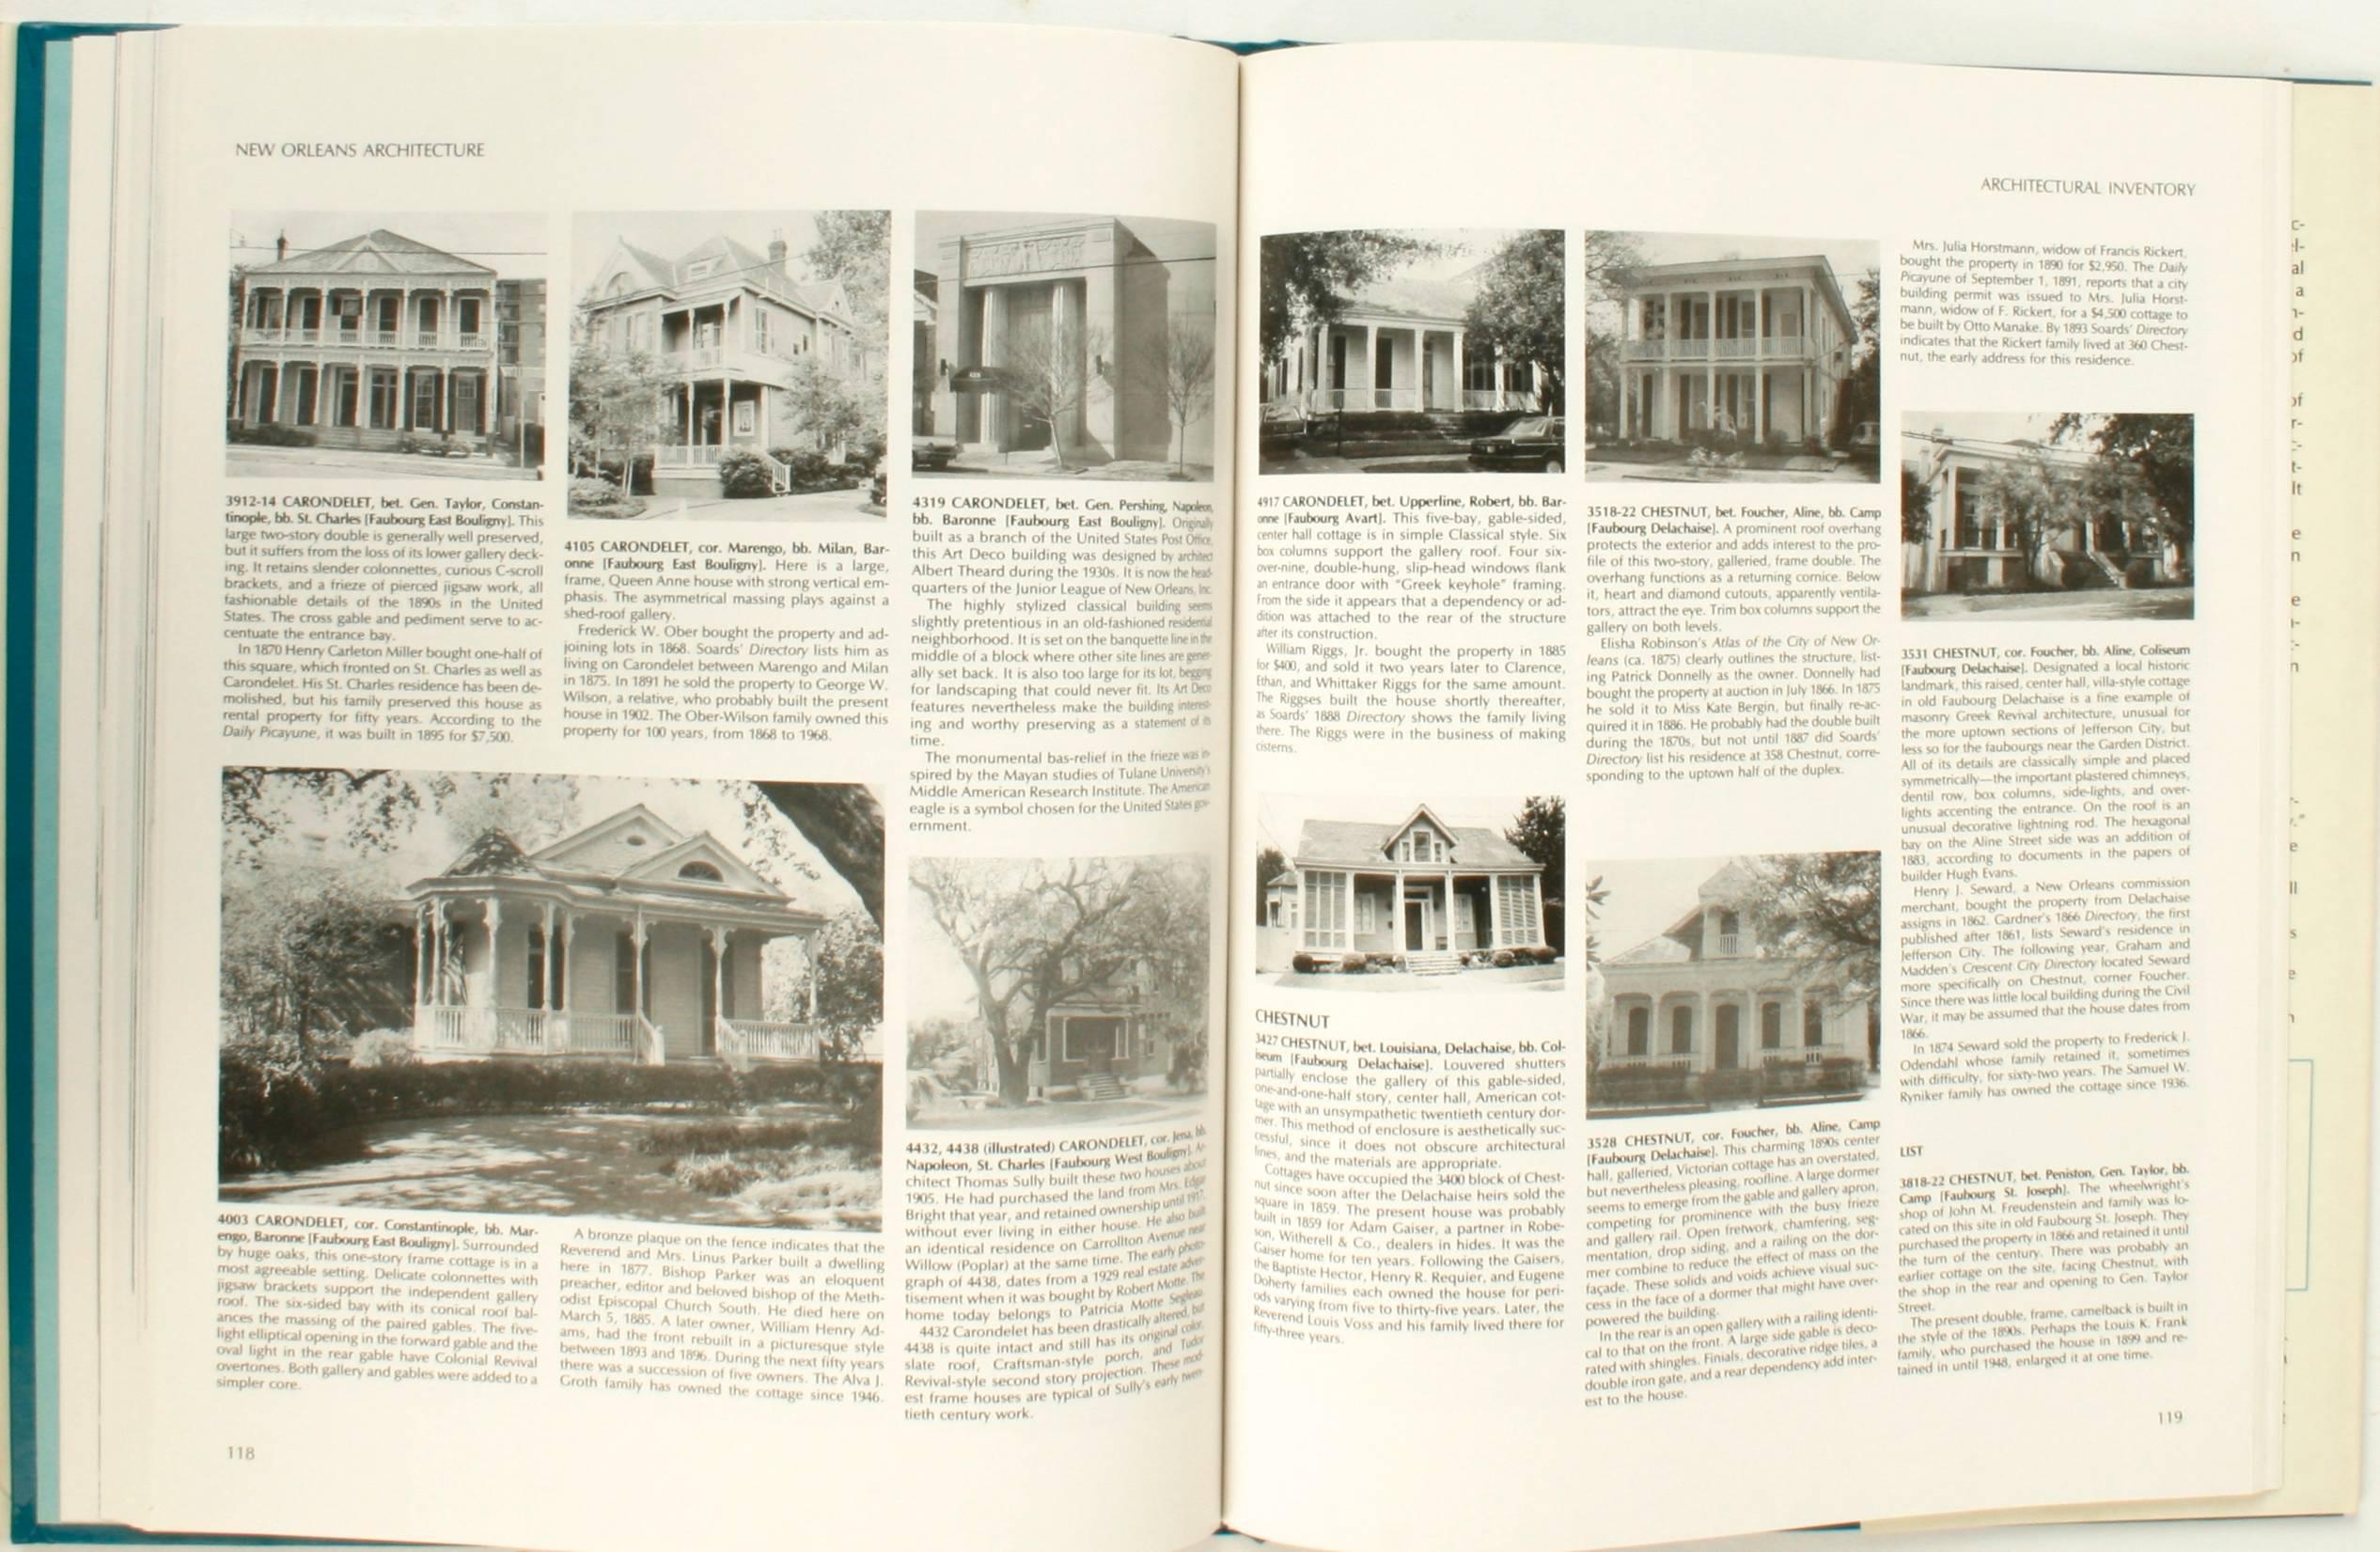 Paper New Orleans Architecture Vol. VII Jefferson City, First Edition For Sale